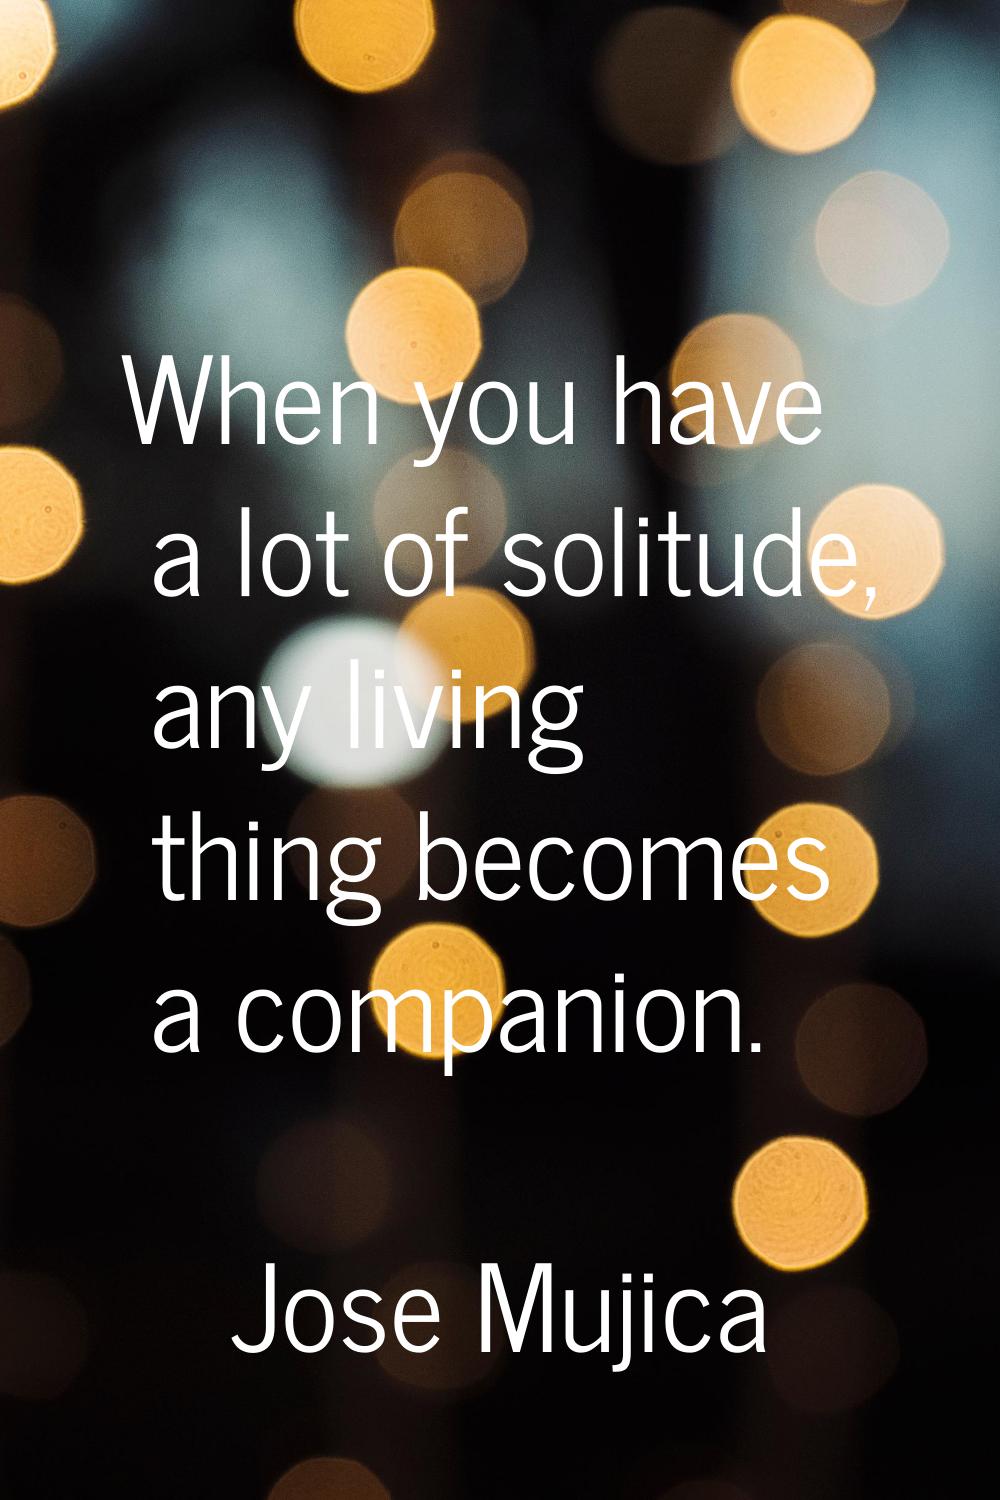 When you have a lot of solitude, any living thing becomes a companion.